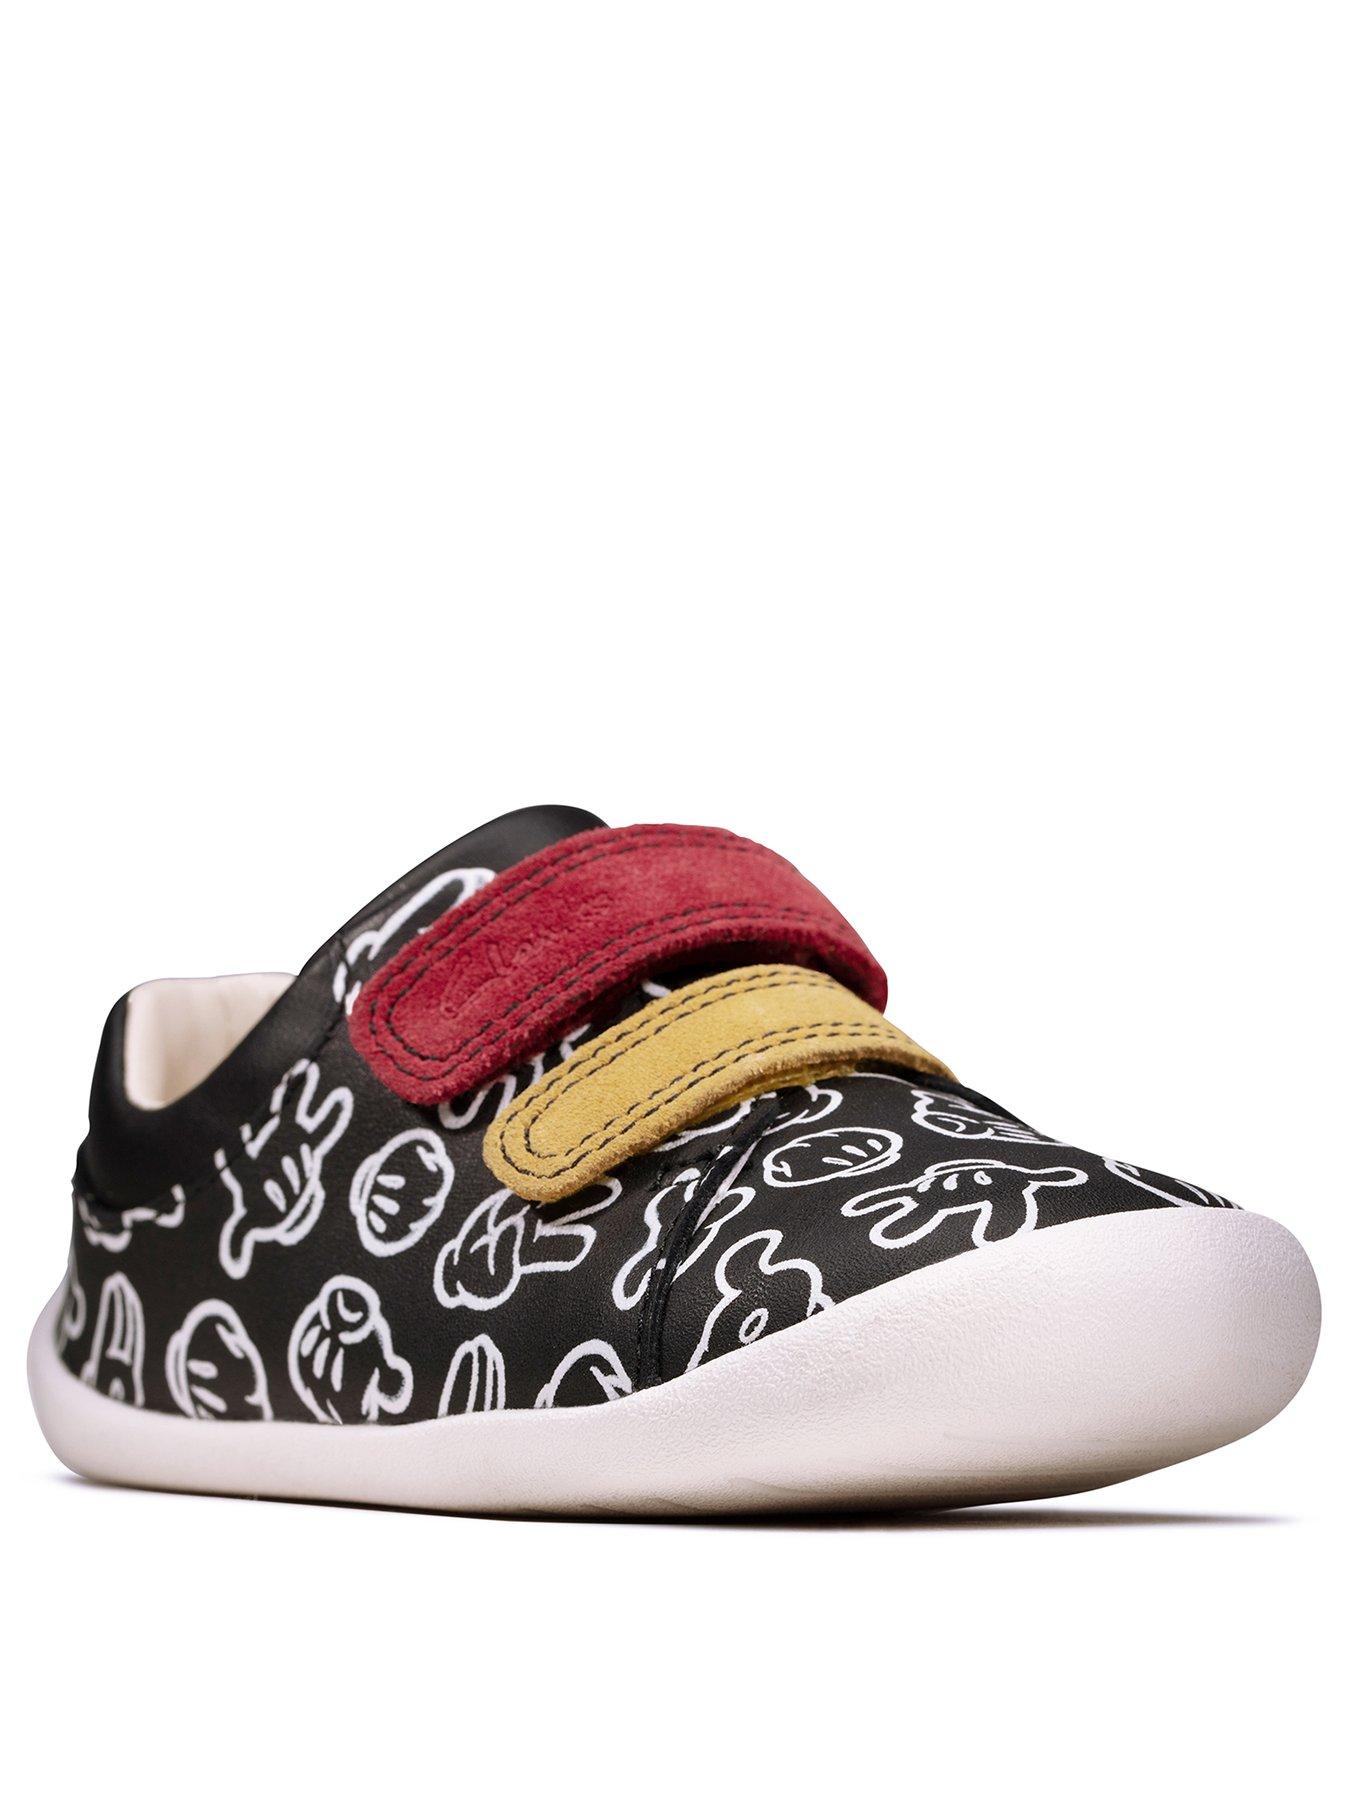 mickey mouse clarks shoes